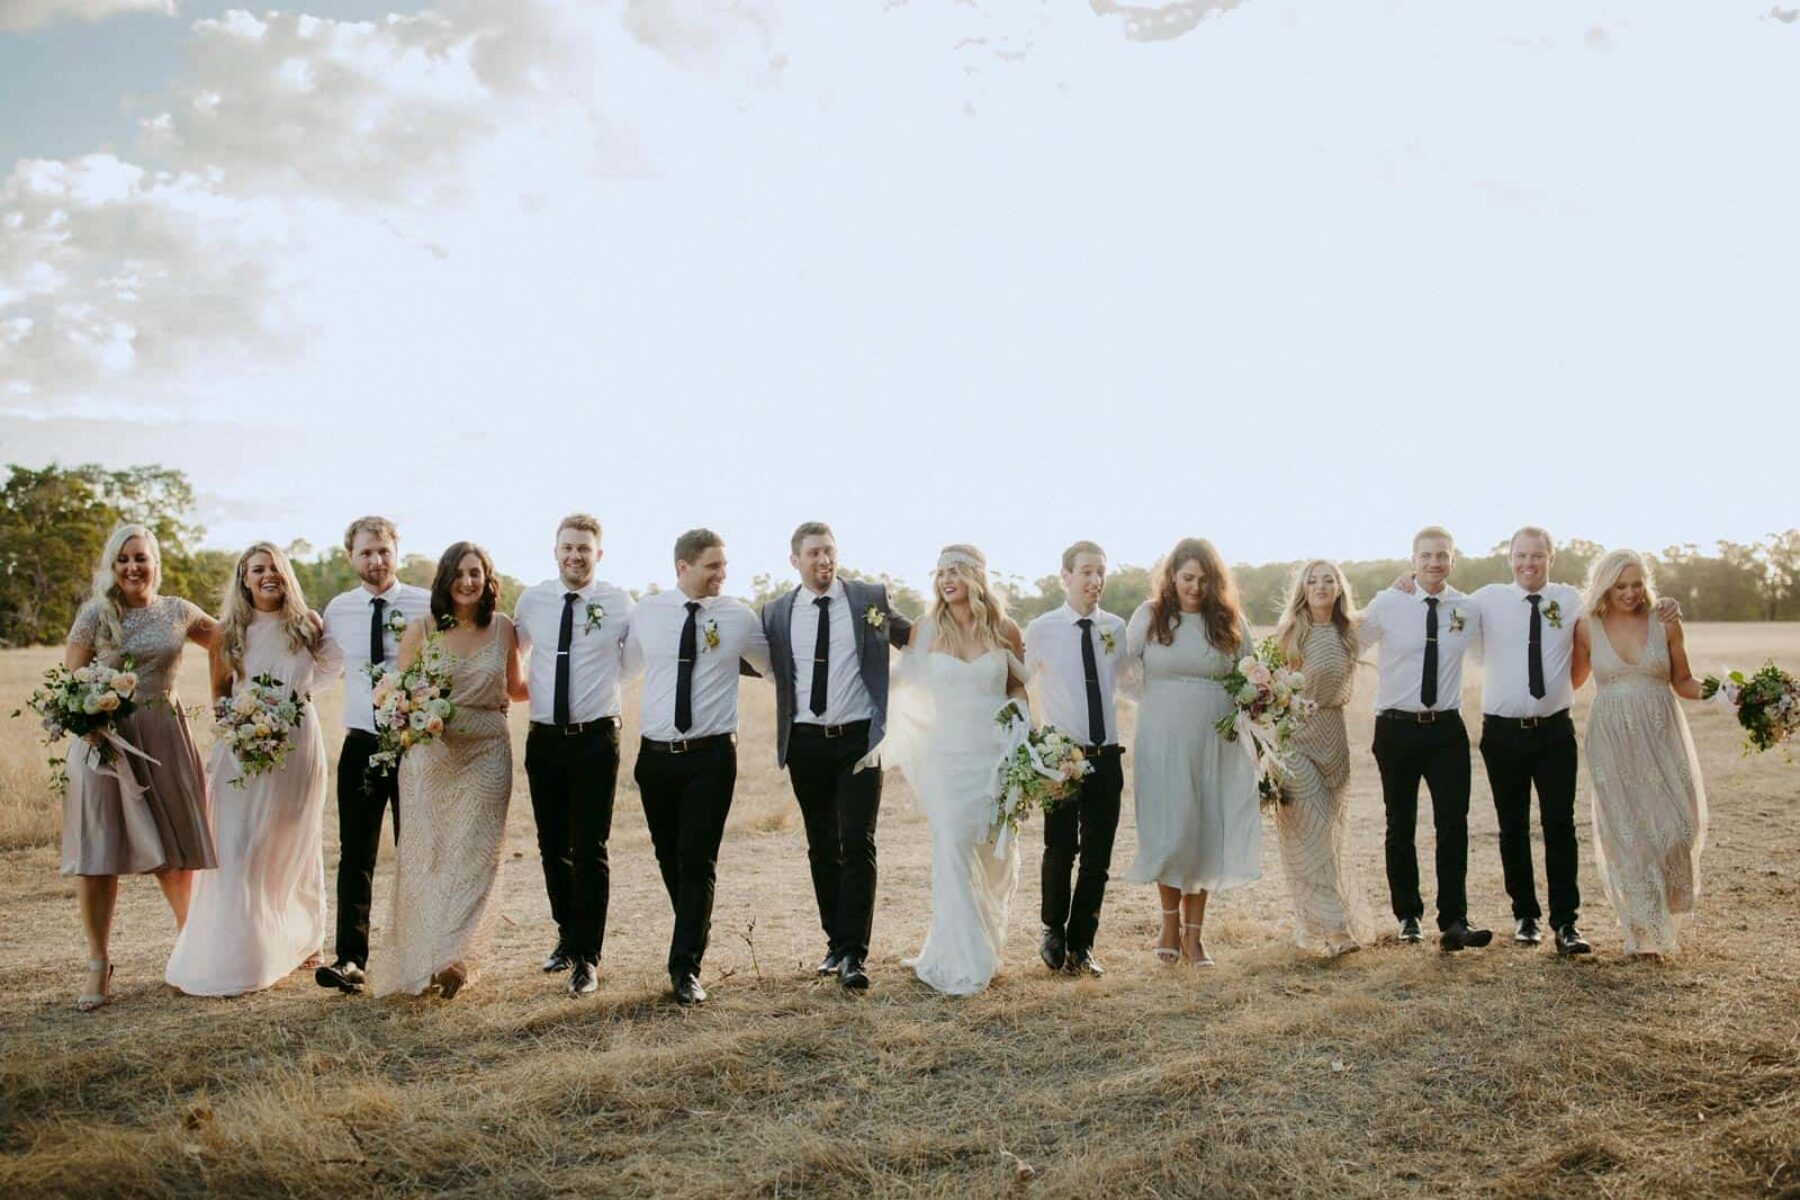 Gatsby inspired bridal party with mismatched neutral bridesmaid dresses